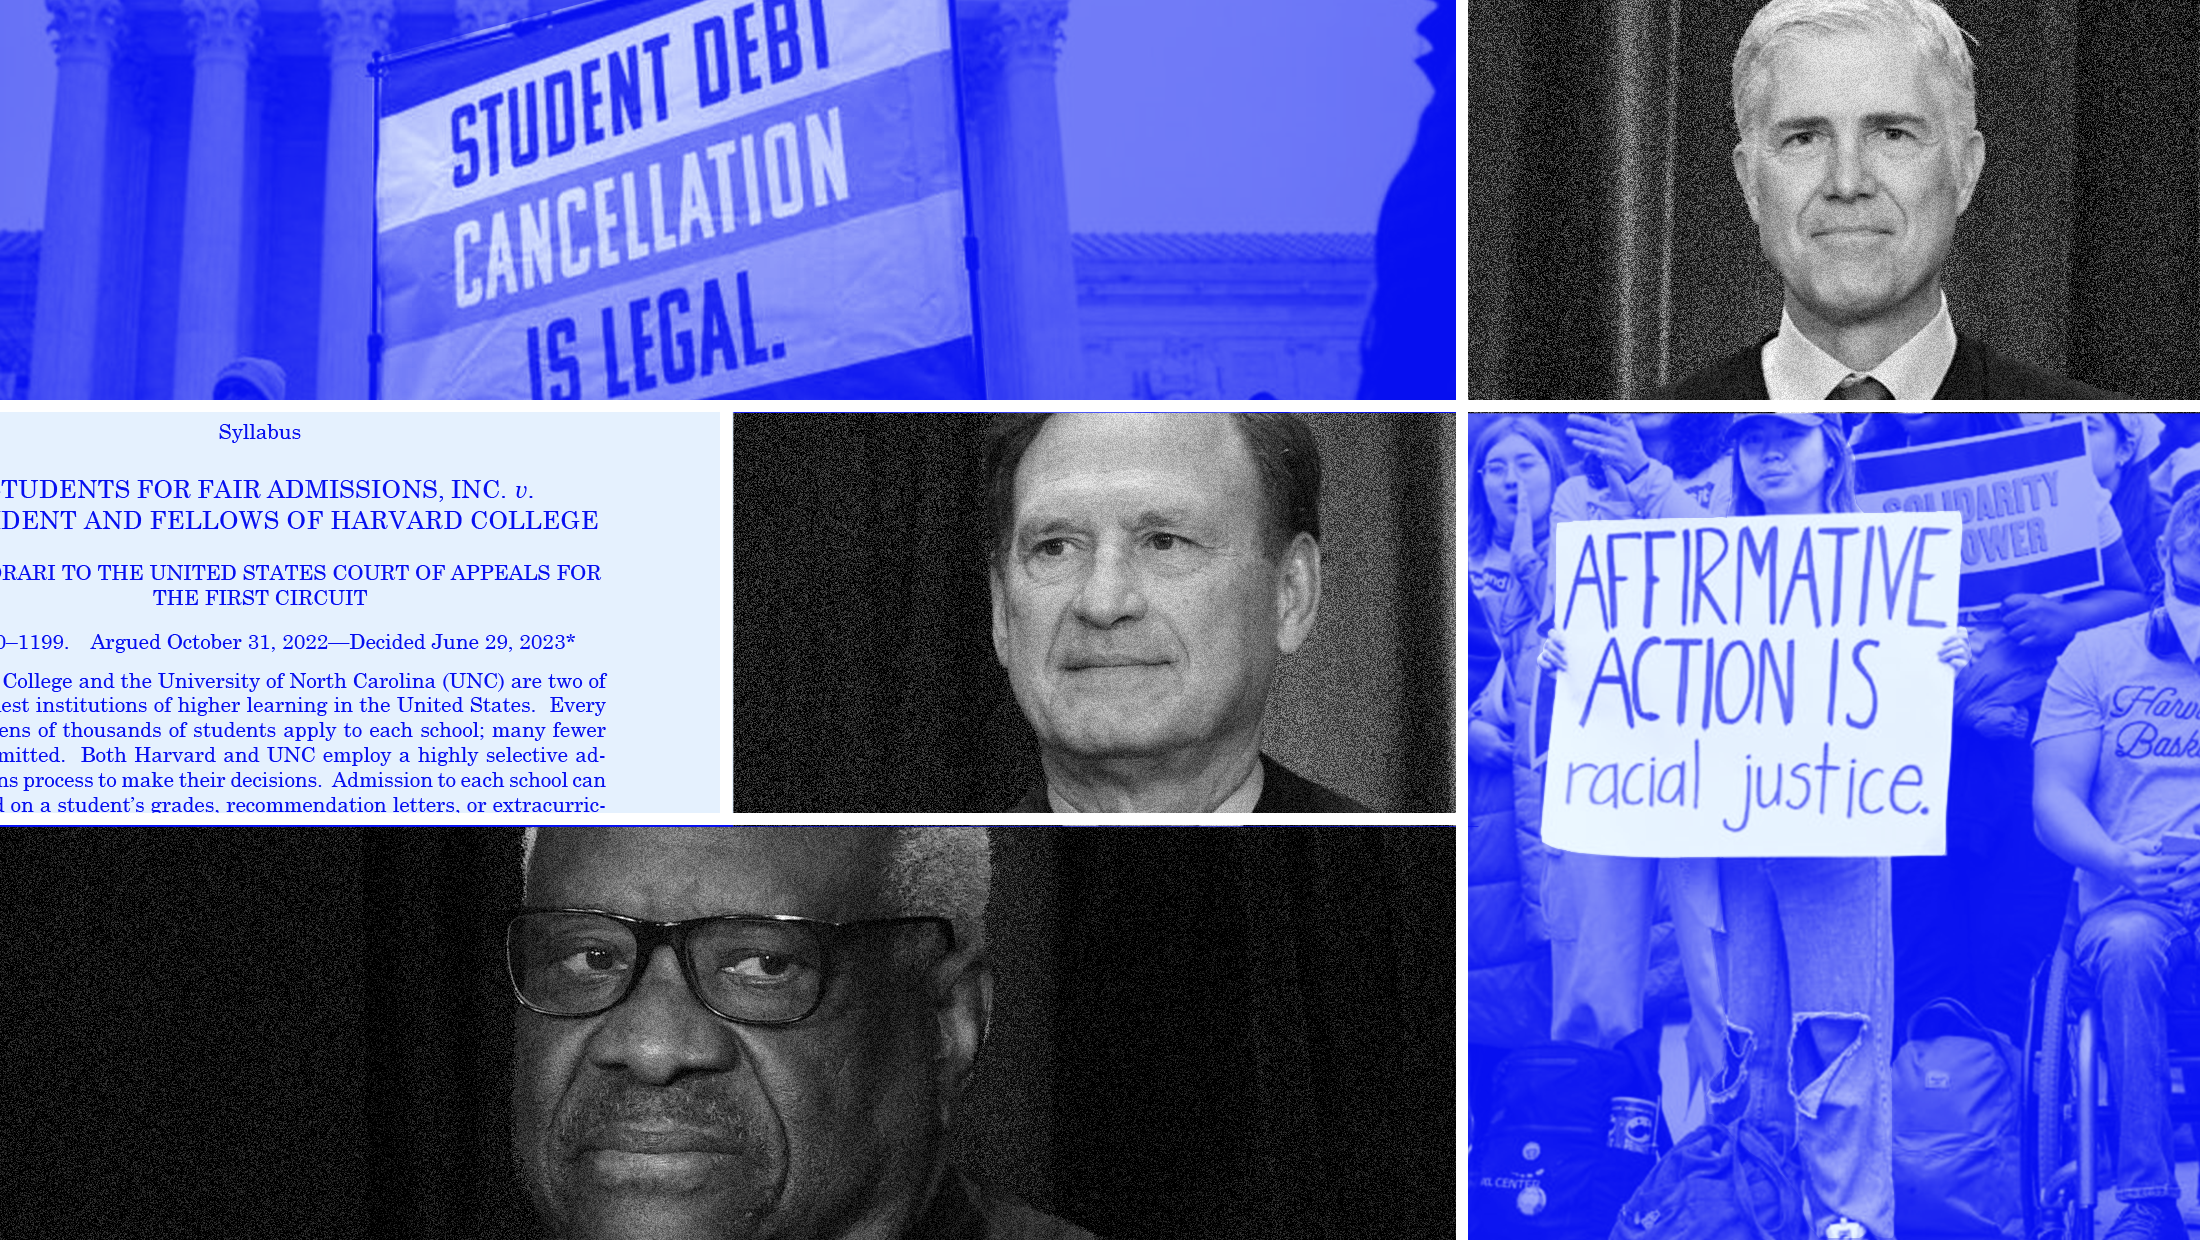 Collage with black and white photos of Supreme Court Justices Clarence Thomas, Samuel Alito and Neil Gorsuch and blue-toned images of people protesting and holding up signs that read "Student Debt Cancellation is Legal" and "Affirmative Action is Racial Justice" and the Court's opinion in Students for Fair Admissions, Inc. v. President and Fellows of Harvard College (2023).